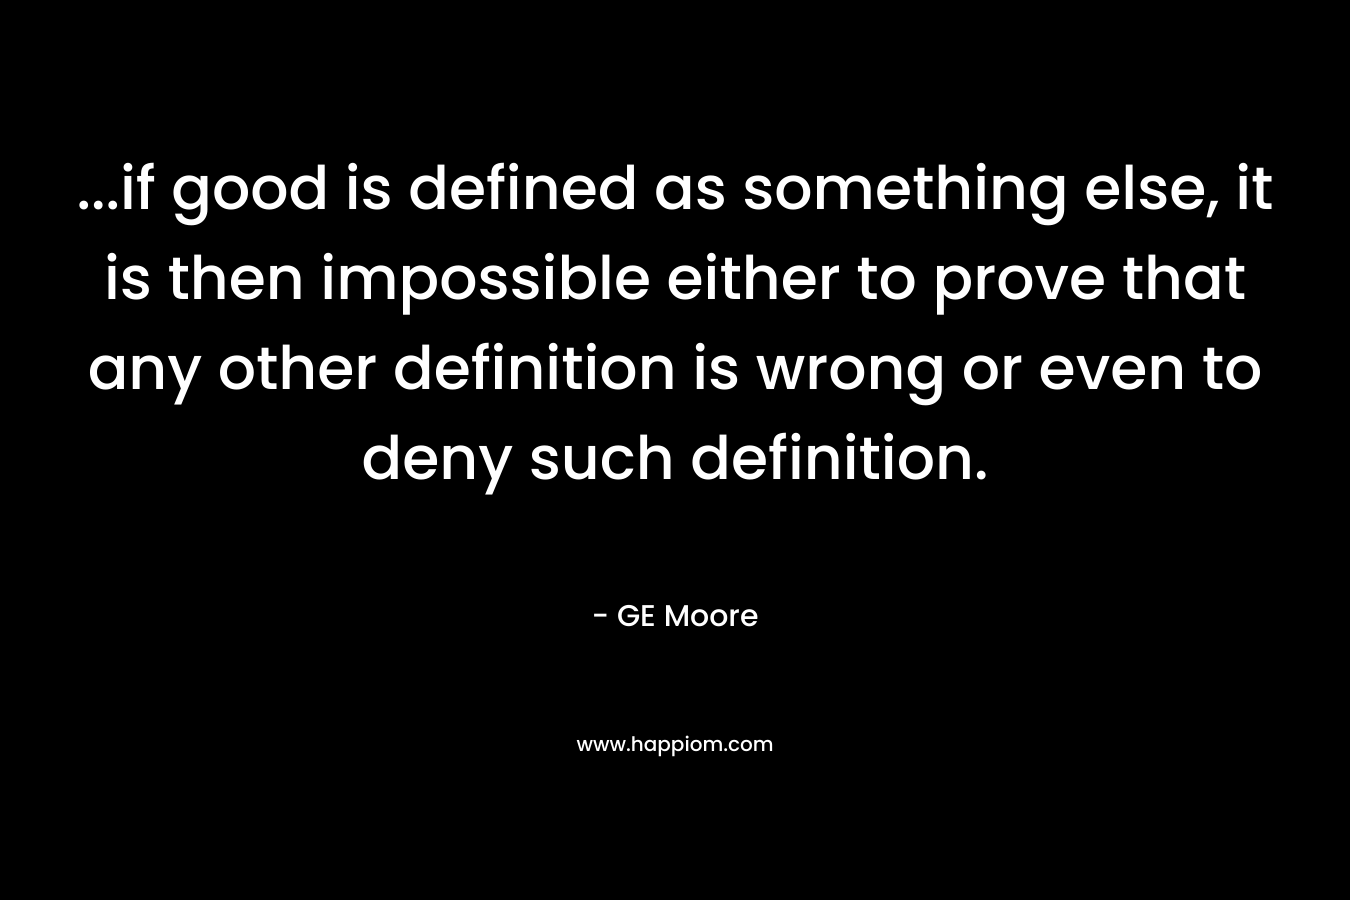 ...if good is defined as something else, it is then impossible either to prove that any other definition is wrong or even to deny such definition.